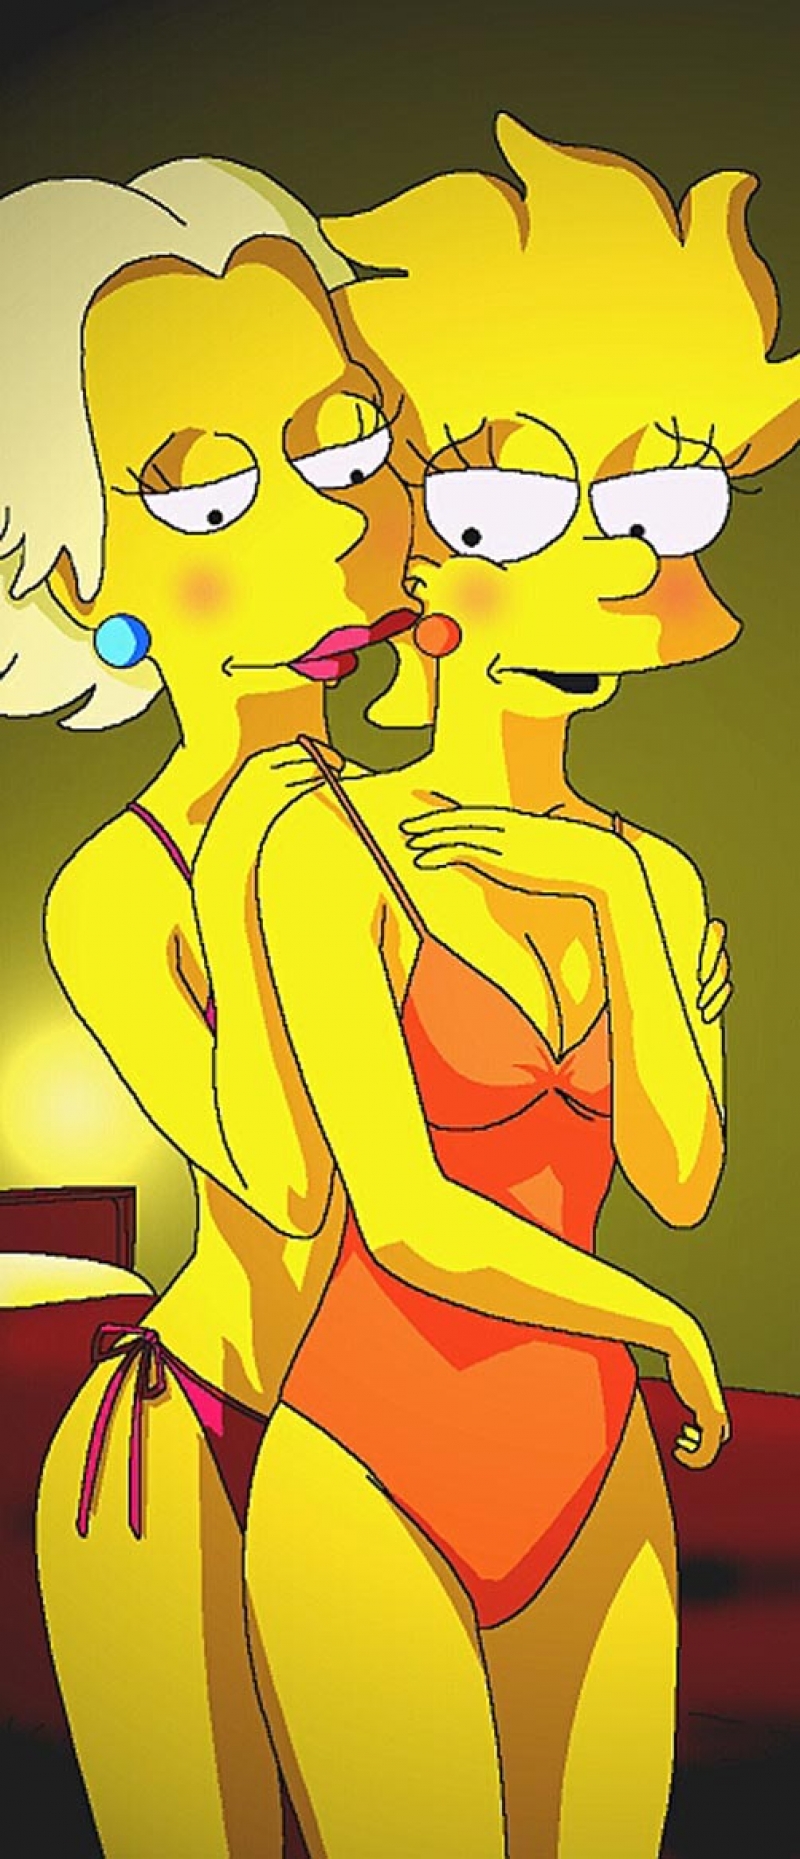 Simpsons Hentai Lesbian Porn - Lisa Simpson looks nervous â€“ she is going to get her first lesbian  experience! â€“ Simpsons Hentai